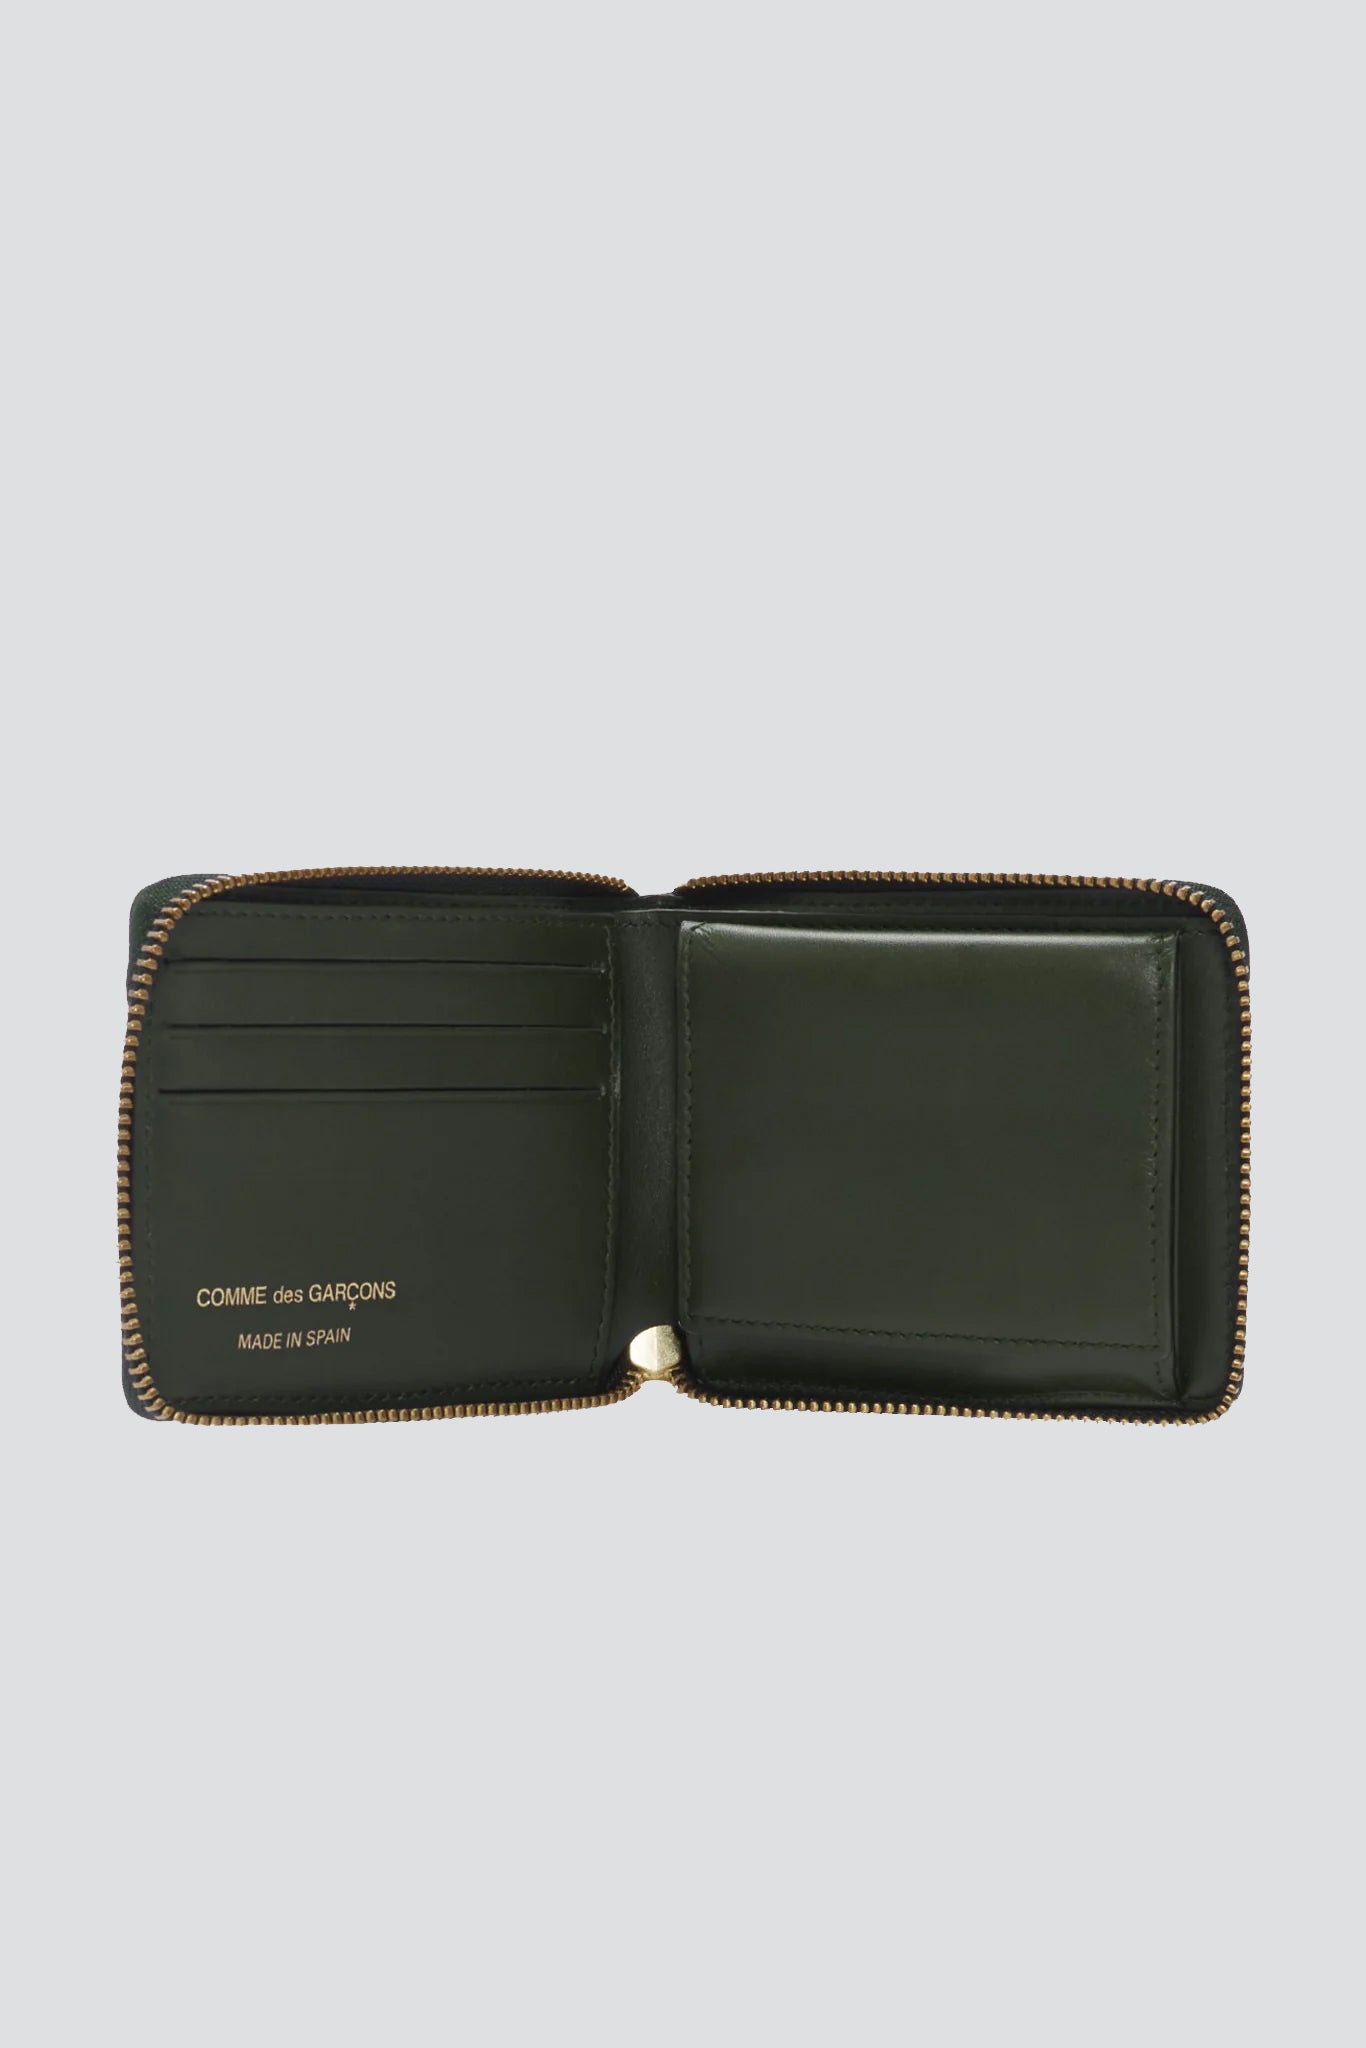 Classic Leather Wallet - Bottle Green - SA7100